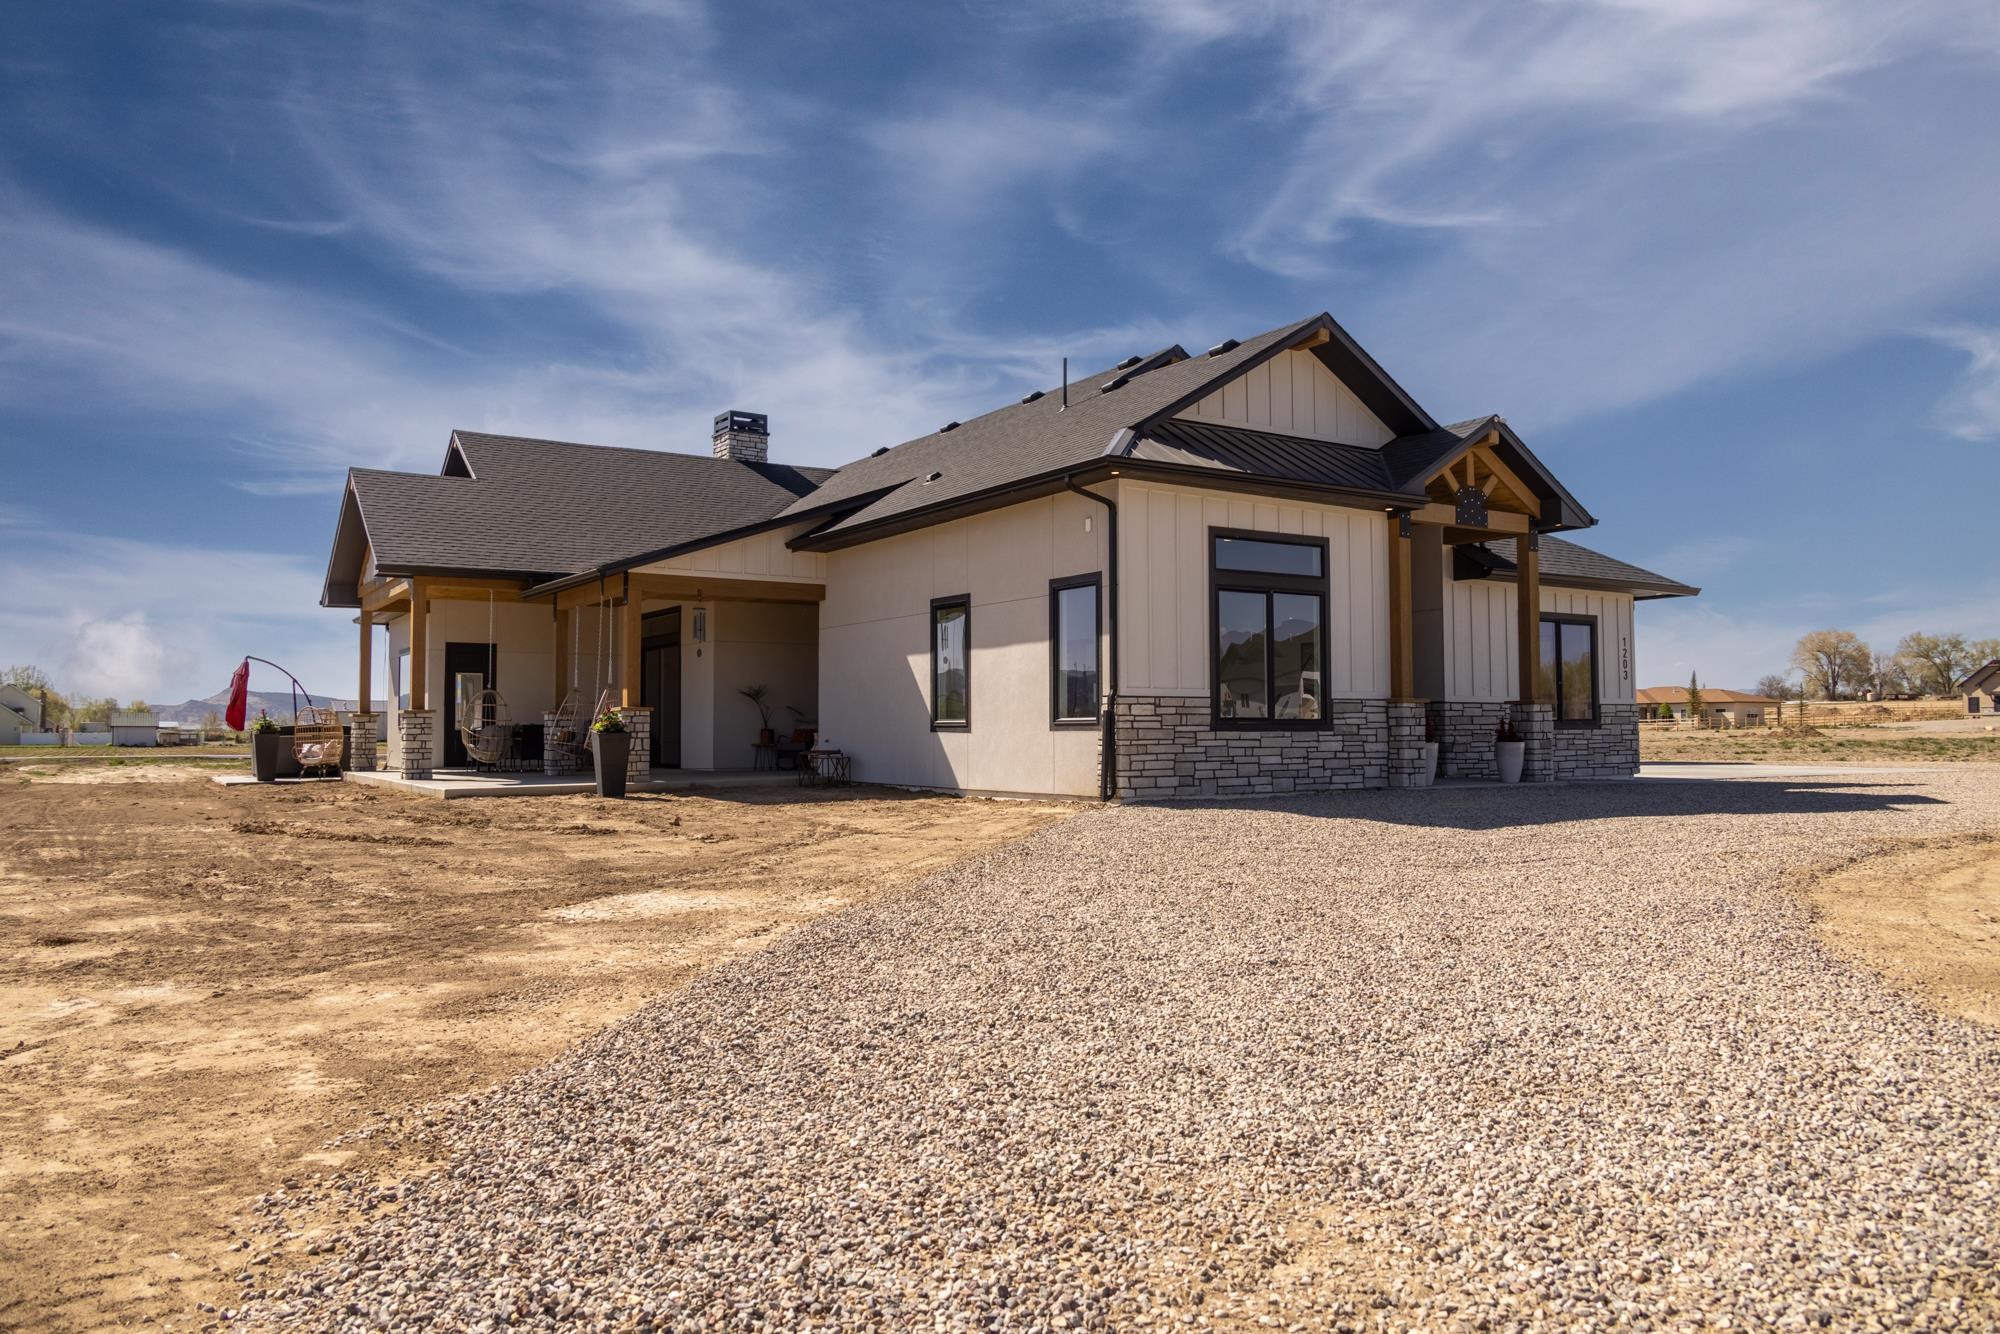 Thoughtfully designed and built by Alta Home Builders on an acre with views just minutes from Fruita’s community center, brewery, coffee shop, hospital, gym and grocery store, this home has it all! Great for multi-generational living, the split floor plan boasts a luxurious primary suite and a beautiful junior en suite, each complete with walk-in closets and stepless showers. Comfortable outdoor living space flows seamlessly into the open concept living room, tied together with sustainable tongue and groove beetle kill pine, a finish which is echoed throughout. The double covered patio offers gas and electricity for an outdoor firepit or kitchen, and the primary bedroom is ready for a hot tub under the stars and facing unobstructed views of the Colorado National Monument. A gorgeous gas fireplace with hand-crafted, rustic shelving and hidden audiovisual storage command attention at the heart of the home.  Classy quartzite countertops add elegance to a practical kitchen with views of the Bookcliffs. A well-appointed butler’s pantry, complete with a prep sink, beverage cooler, cabinetry and wine storage keeps small appliances tucked away in a tidy workspace.  Designed to flex along with the needs of a family all on one level, the primary suite offers a spa feel with a gorgeous, tiled shower designed for aging in place in style or spoiling yourself every day. The middle bathroom includes an oversized soaking tub finished in a glamourous polished tile, serving two additional, spacious bedrooms or hobby rooms.  Finally, the heated, attached 1,500 sf garage with a tall RV garage bay provides storage for trailers, campers and toys, or a wonderful workshop, helping homeowners avoid the additional cost of building a shop on the property. Come see if this is your dream home!